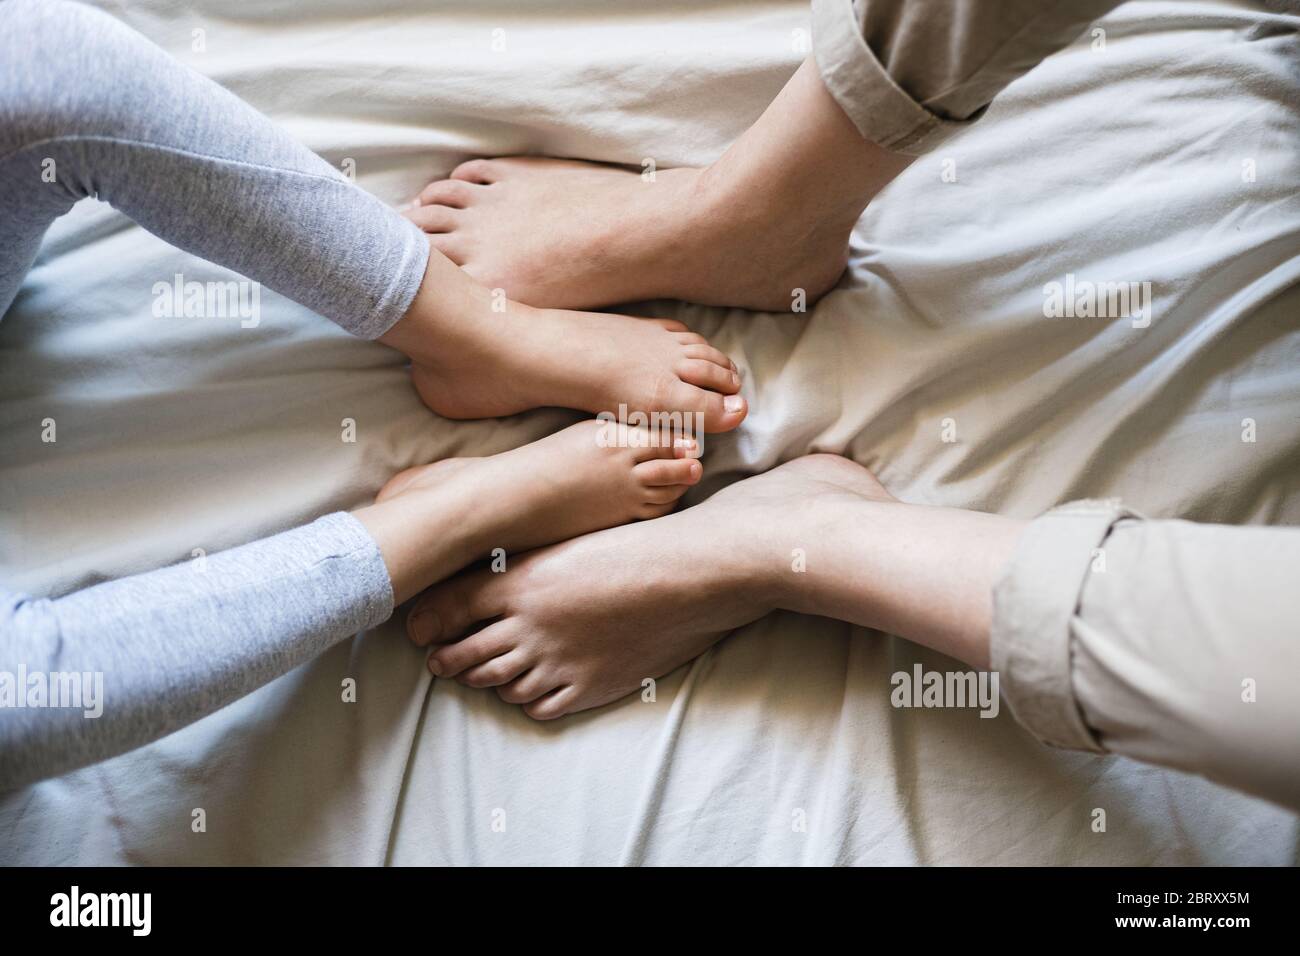 Mother and child cross their feet together as they sit on some beige bed sheets. It's a tender moment as they compare how similar they are Stock Photo